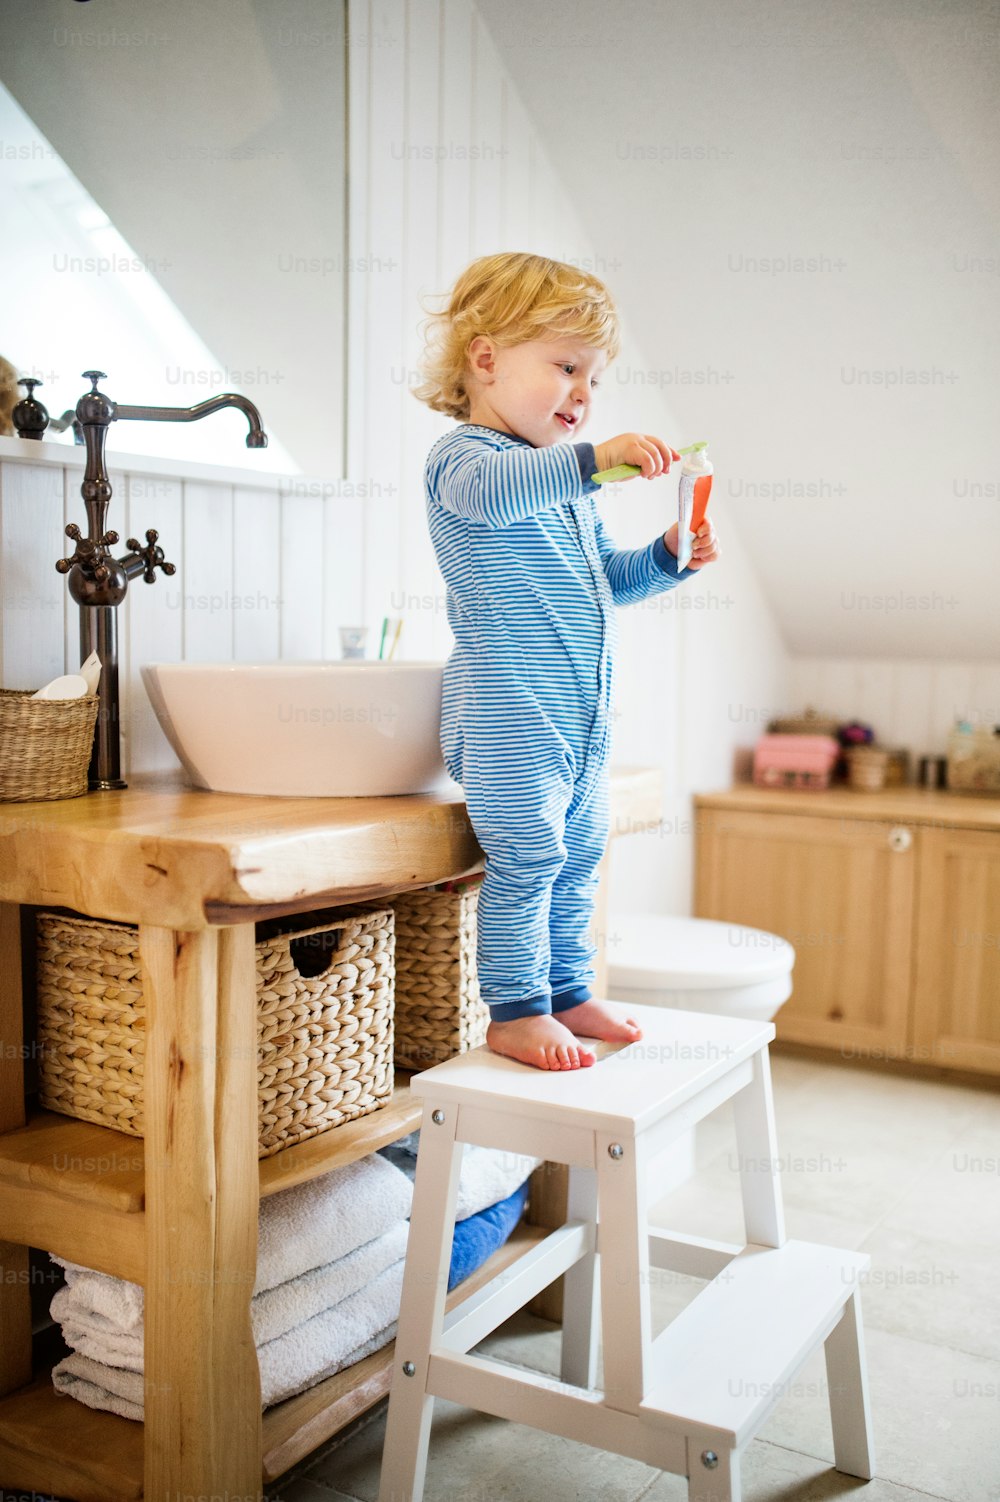 Cute toddler brushing his teeth in the bathroom. Little boy standing on a stool.